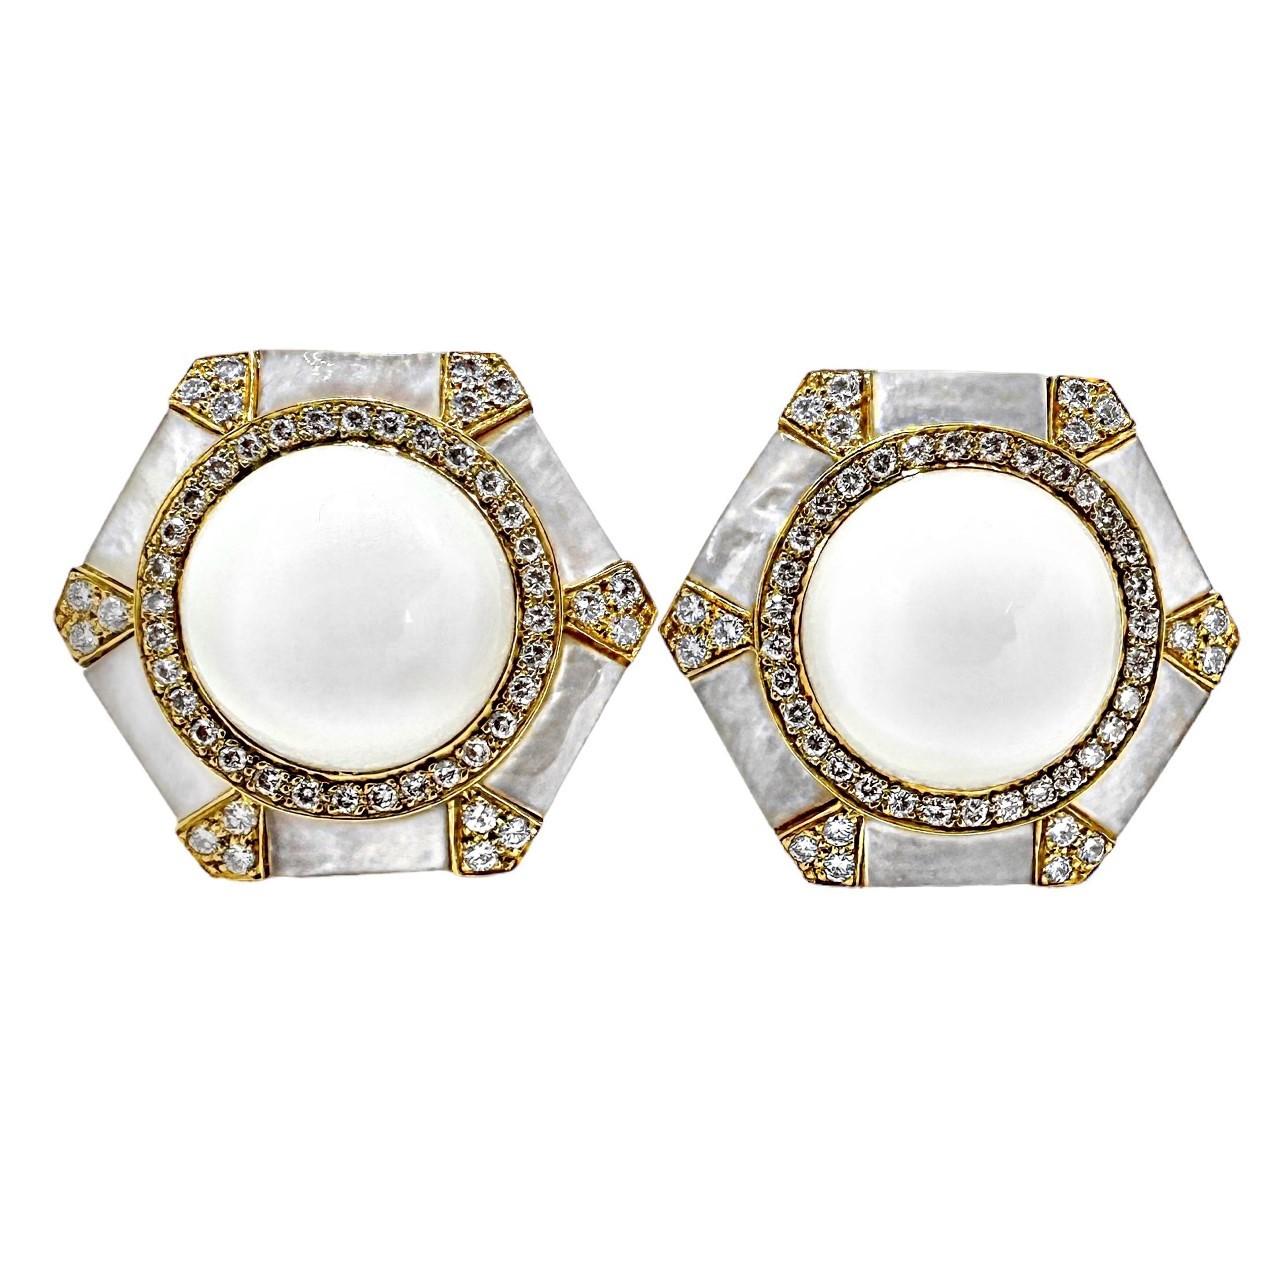 This unique and elegant vintage pair of 18K yellow gold hexagonal earrings was imagined and created by highly regarded designer, Albert Lipten.  At their center are 16mm natural snow white onyx cabochons which are surrounded by panels of luminescent